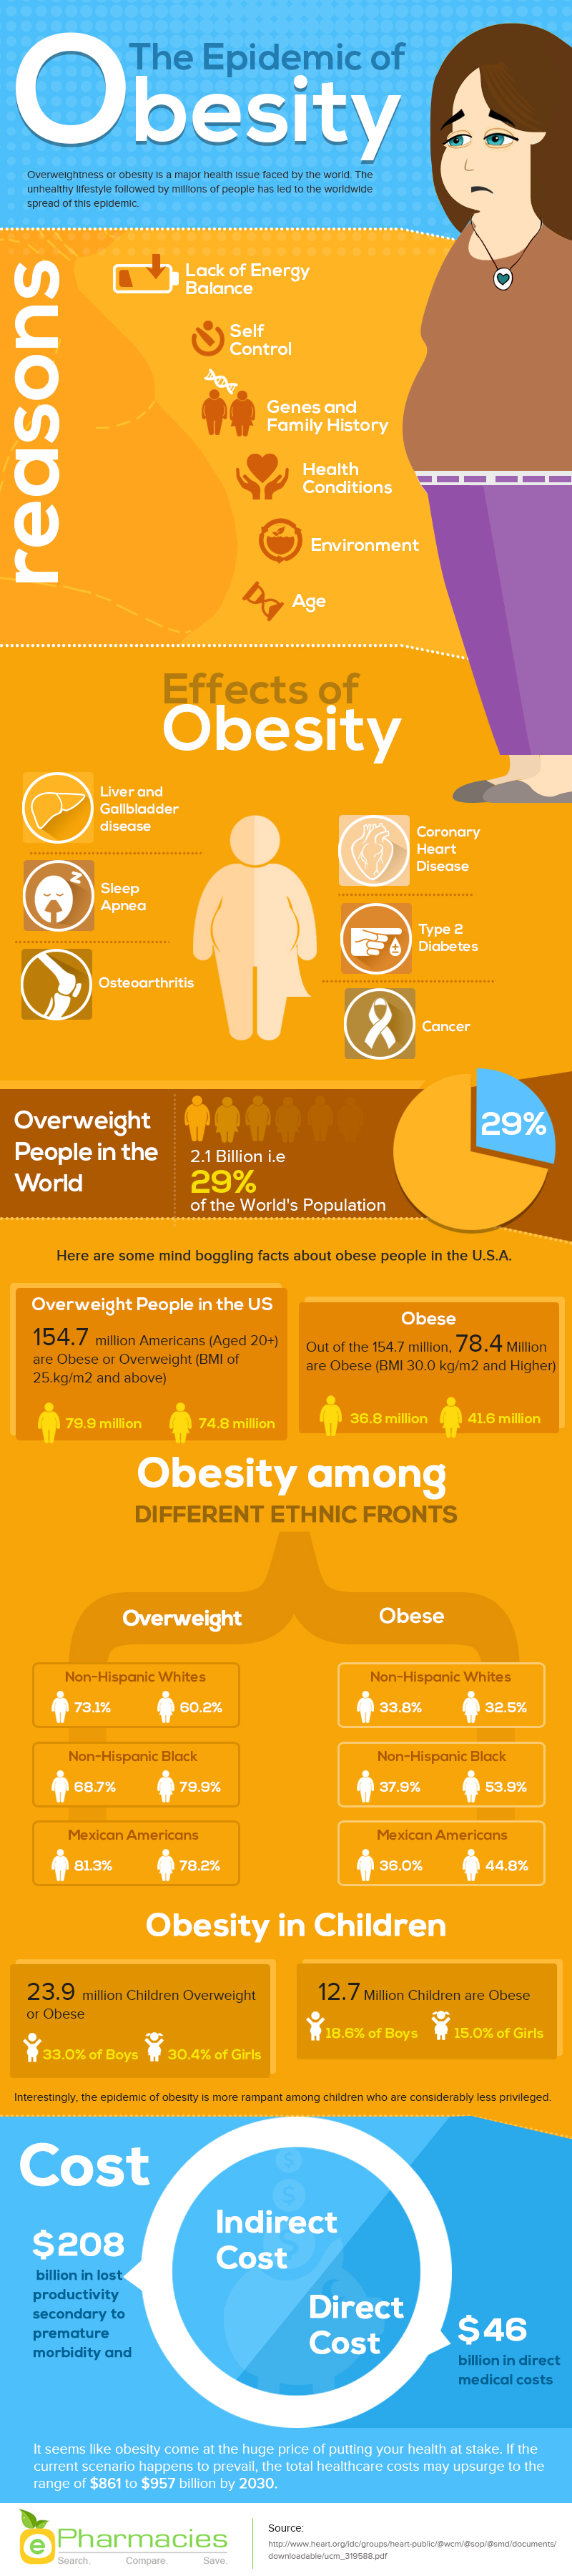 The Epidemic of Obesity